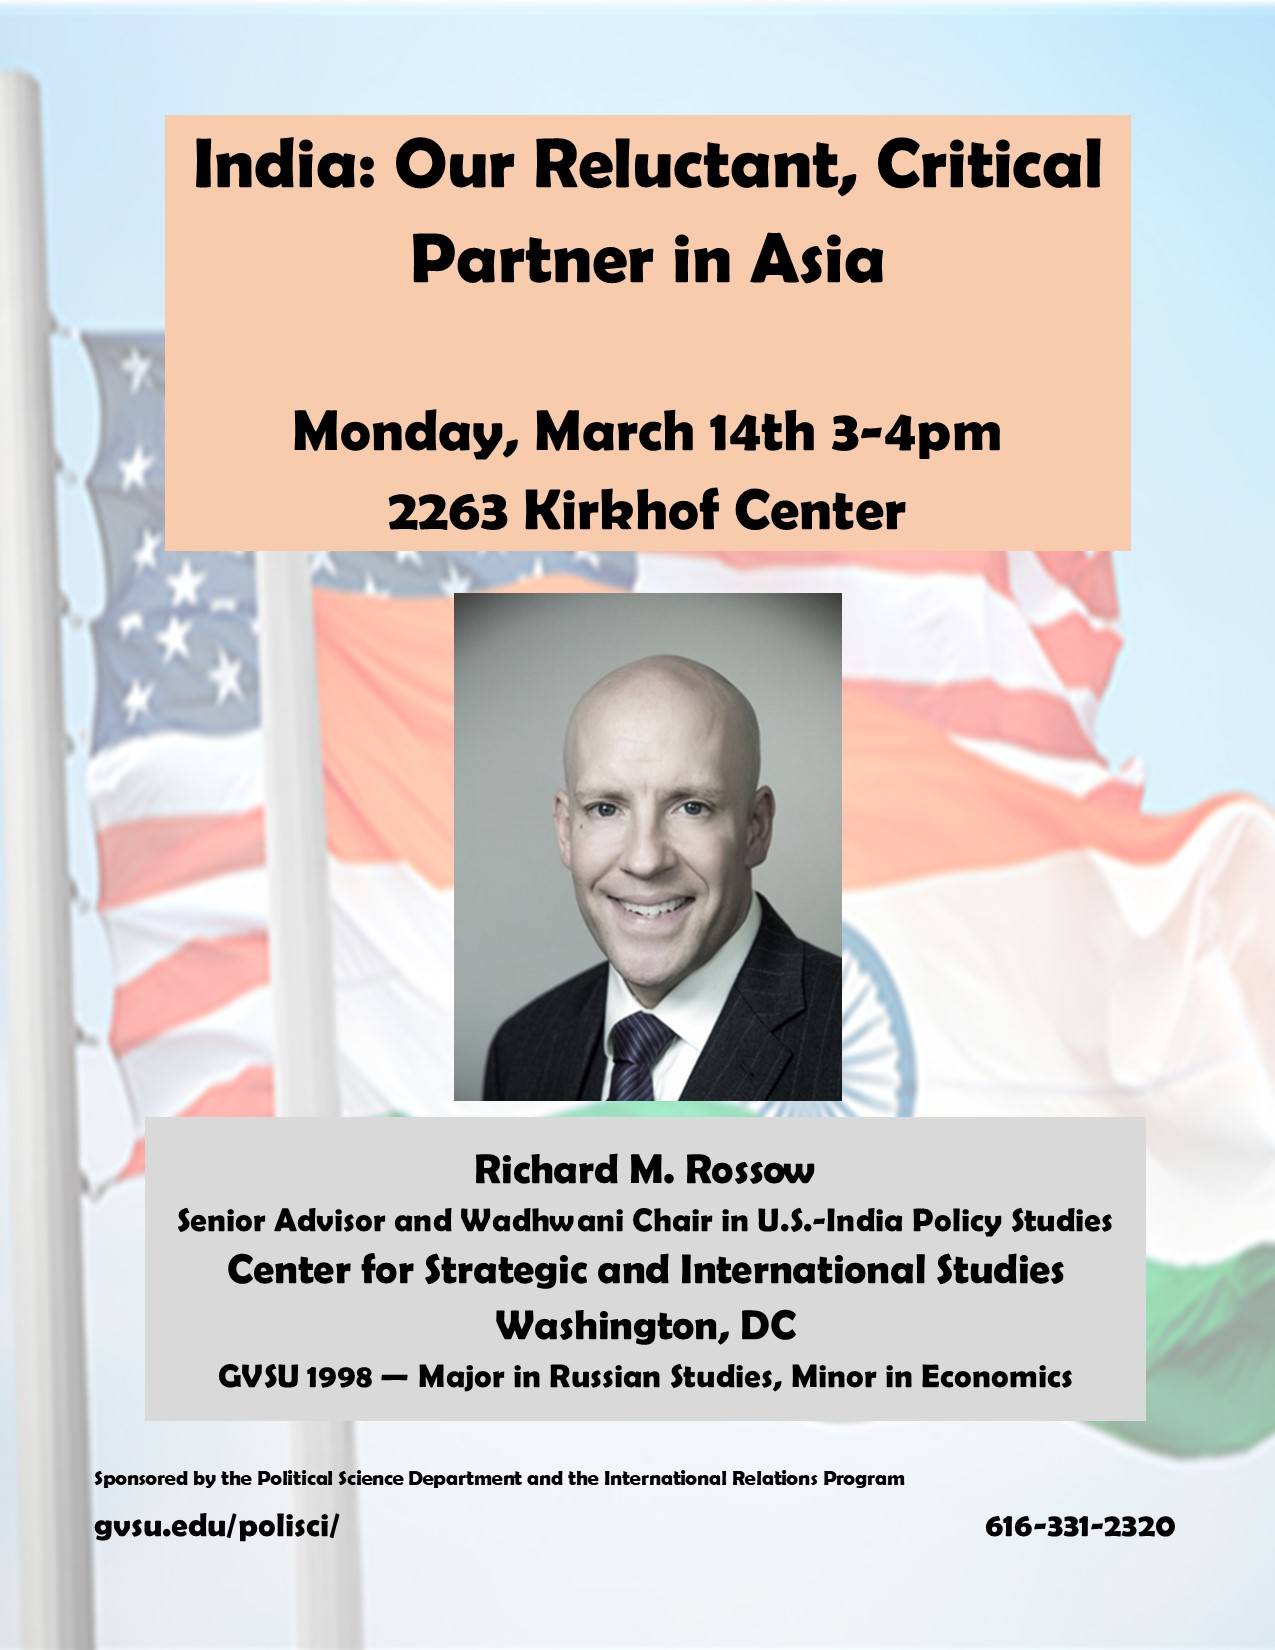 Rick Rossow graduated from GVSU in 1998 and is now the Senior Advisor and Wadhwani Chair in U.S.-India Policy Studies at the Center for Strategic and International Studies in DC.  He will speak on the U.S. India Relationship